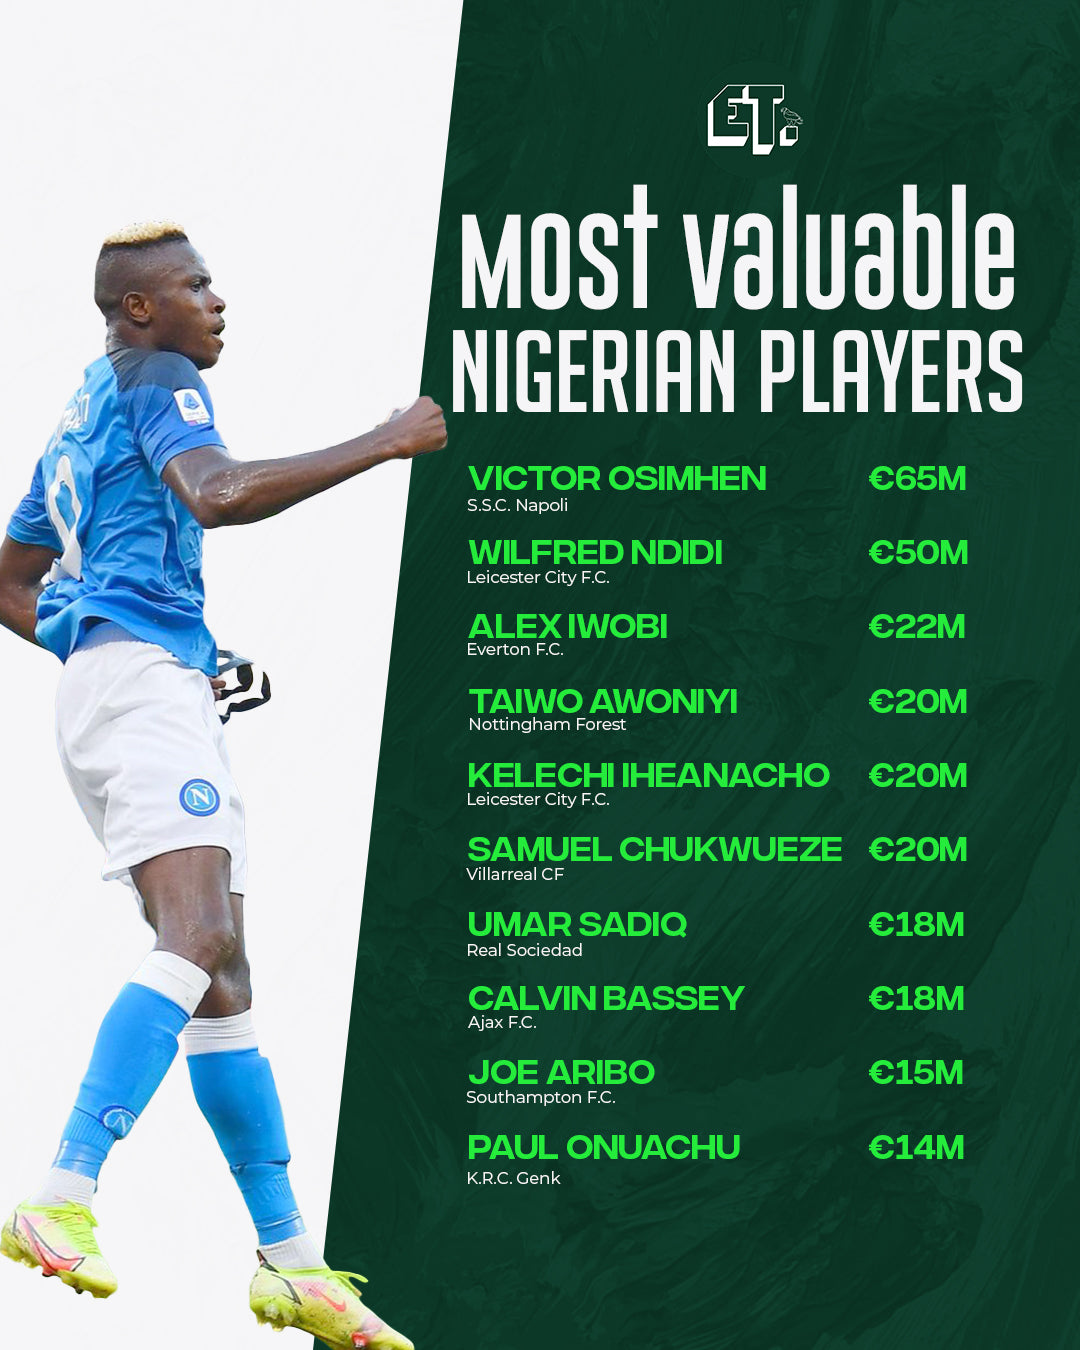 Nigeria's most valuable players: Who makes the top 20?